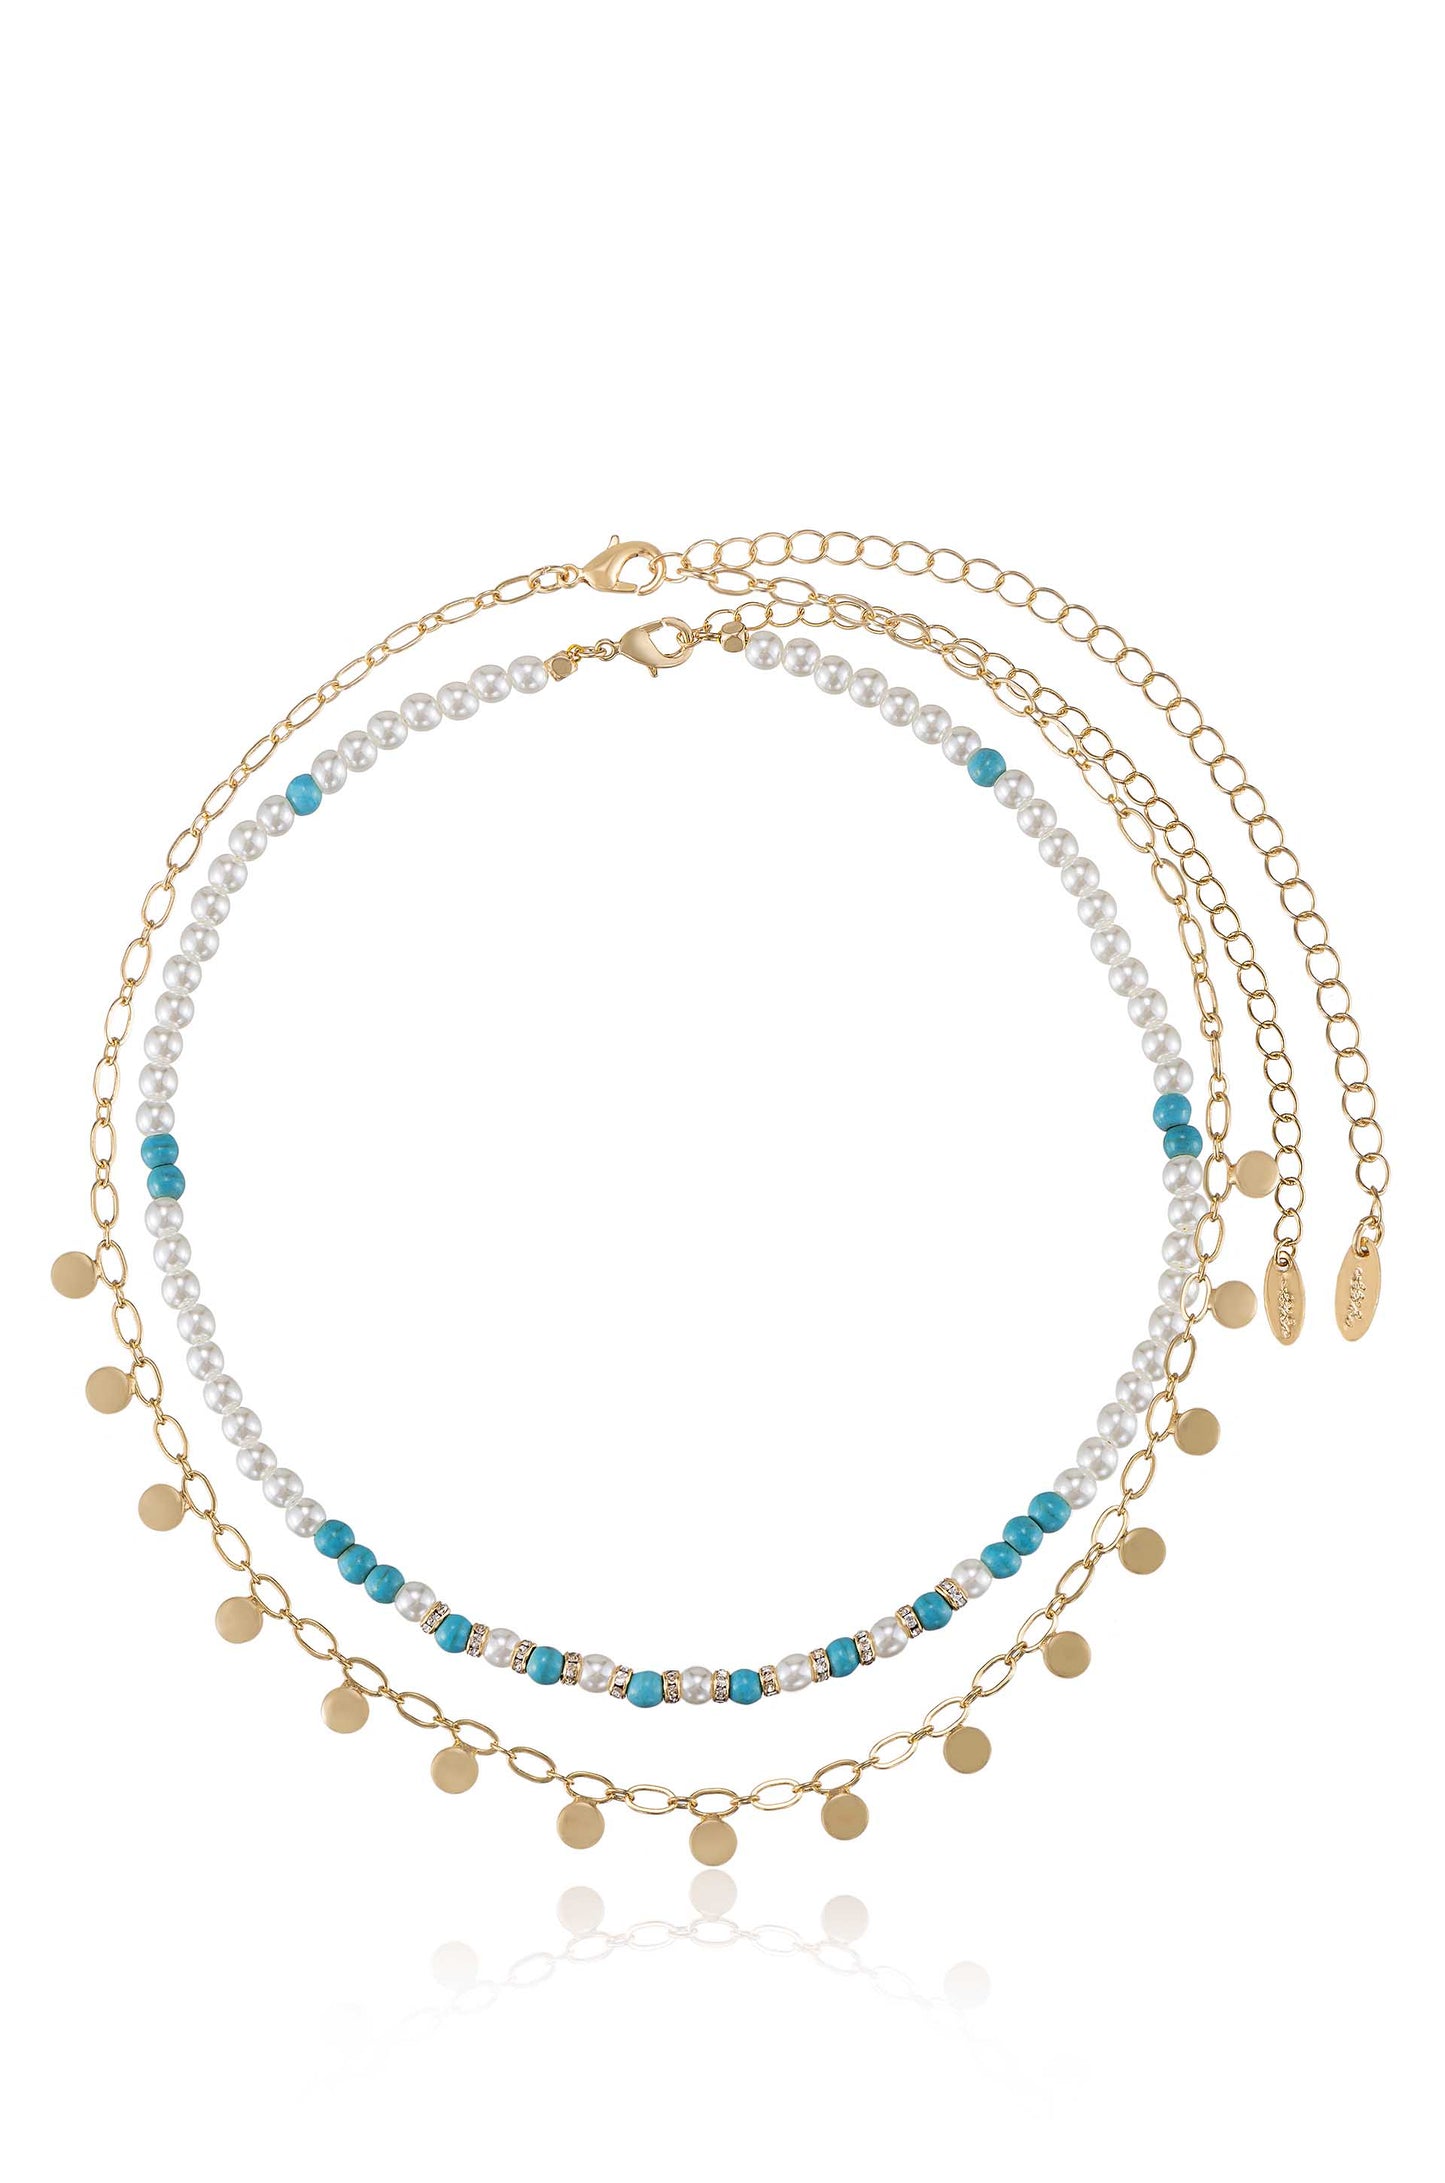 Morocco Turquoise Beaded 18k Gold Plated Necklace Set